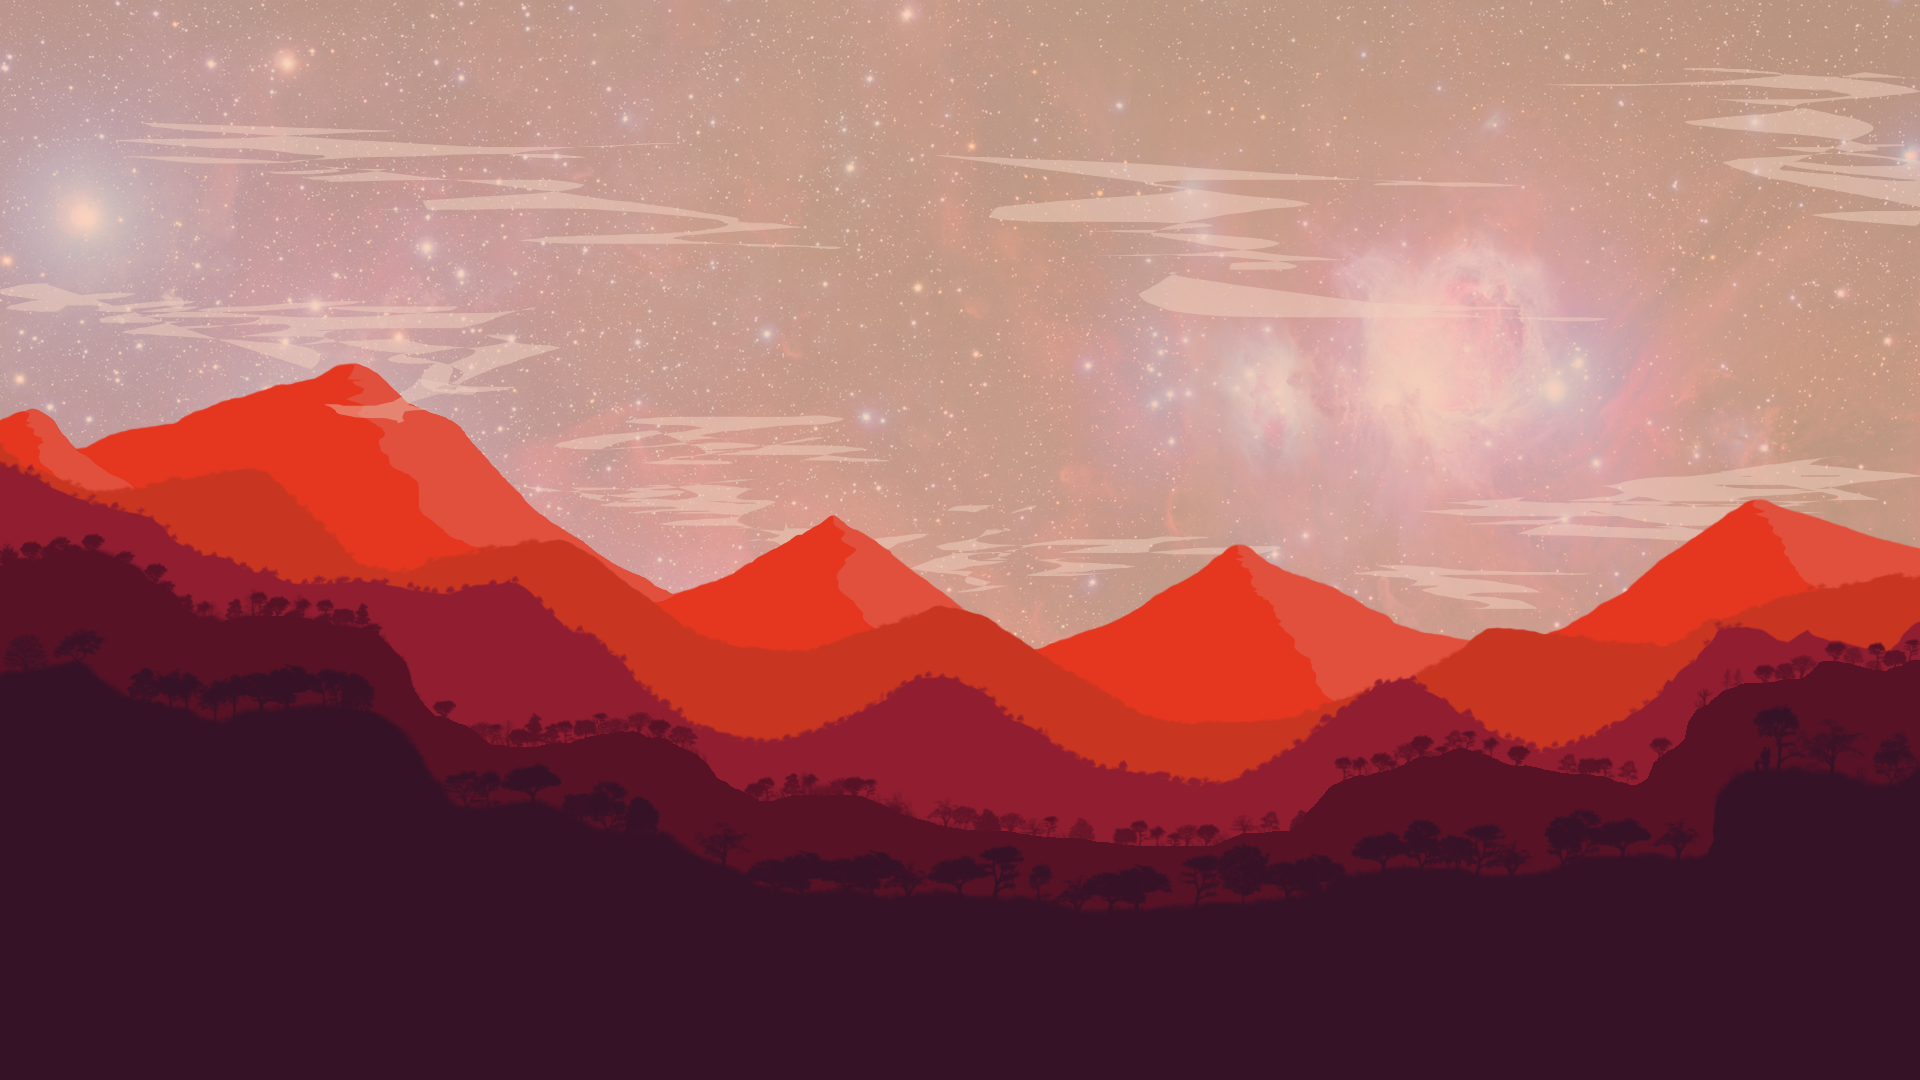 General 1920x1080 landscape abstract red mountains photoshopped space